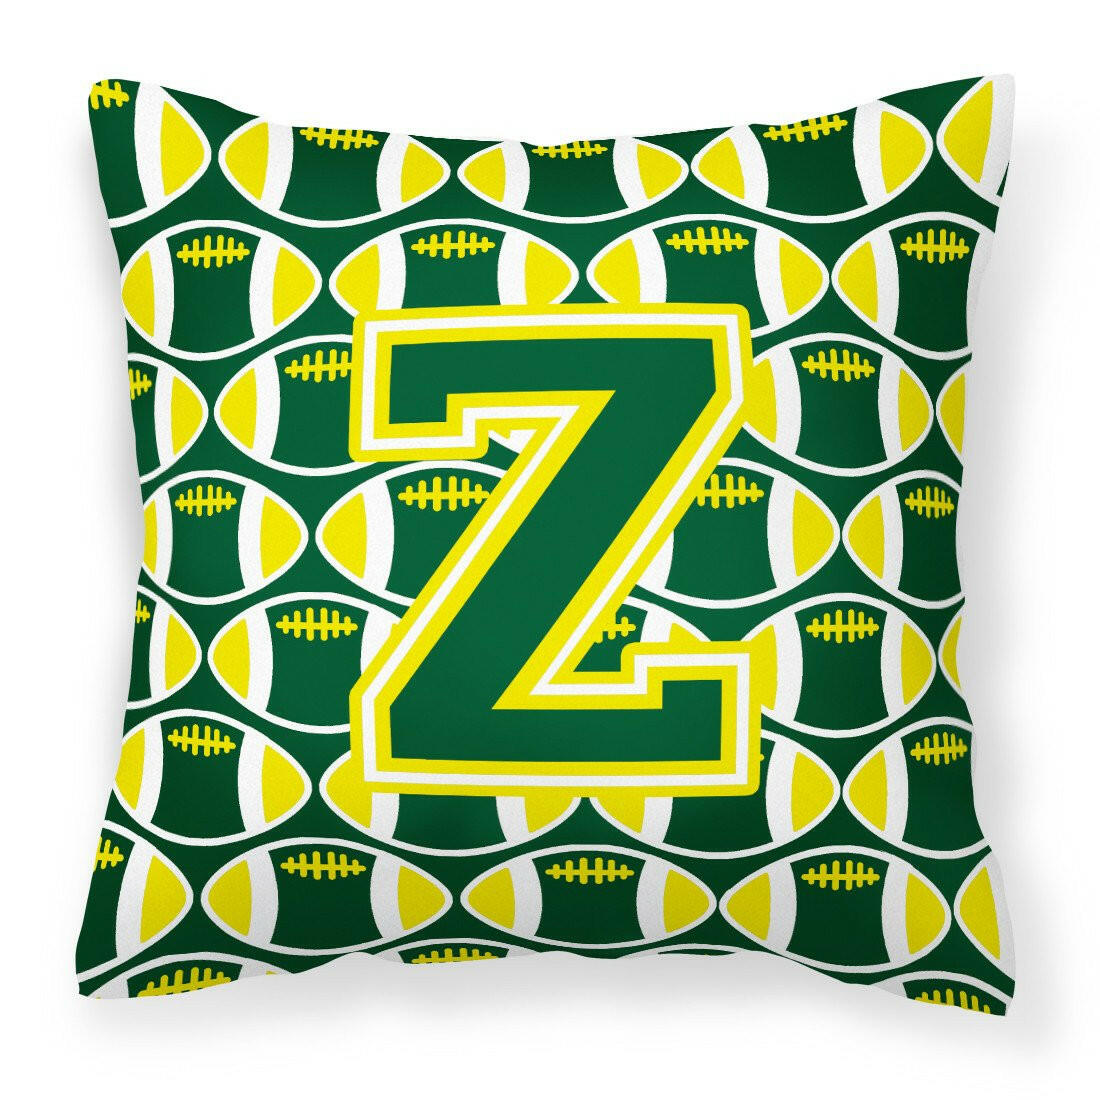 Letter Z Football Green and Yellow Fabric Decorative Pillow CJ1075-ZPW1414 by Caroline's Treasures